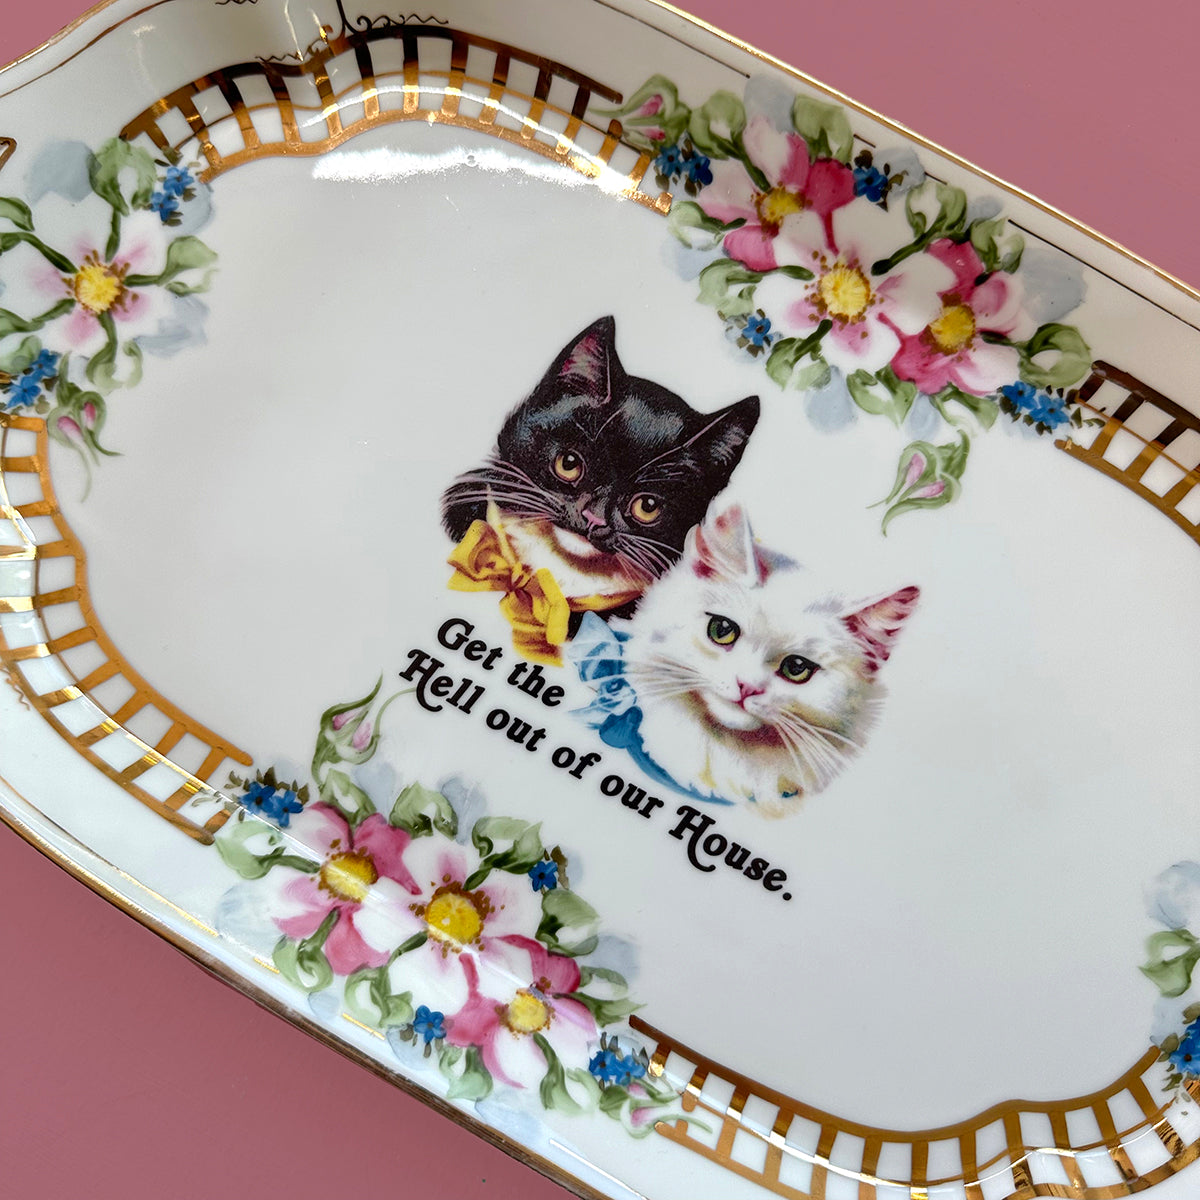 Antique Art Platter - Cat plate - "Get the Hell Out of Our House"